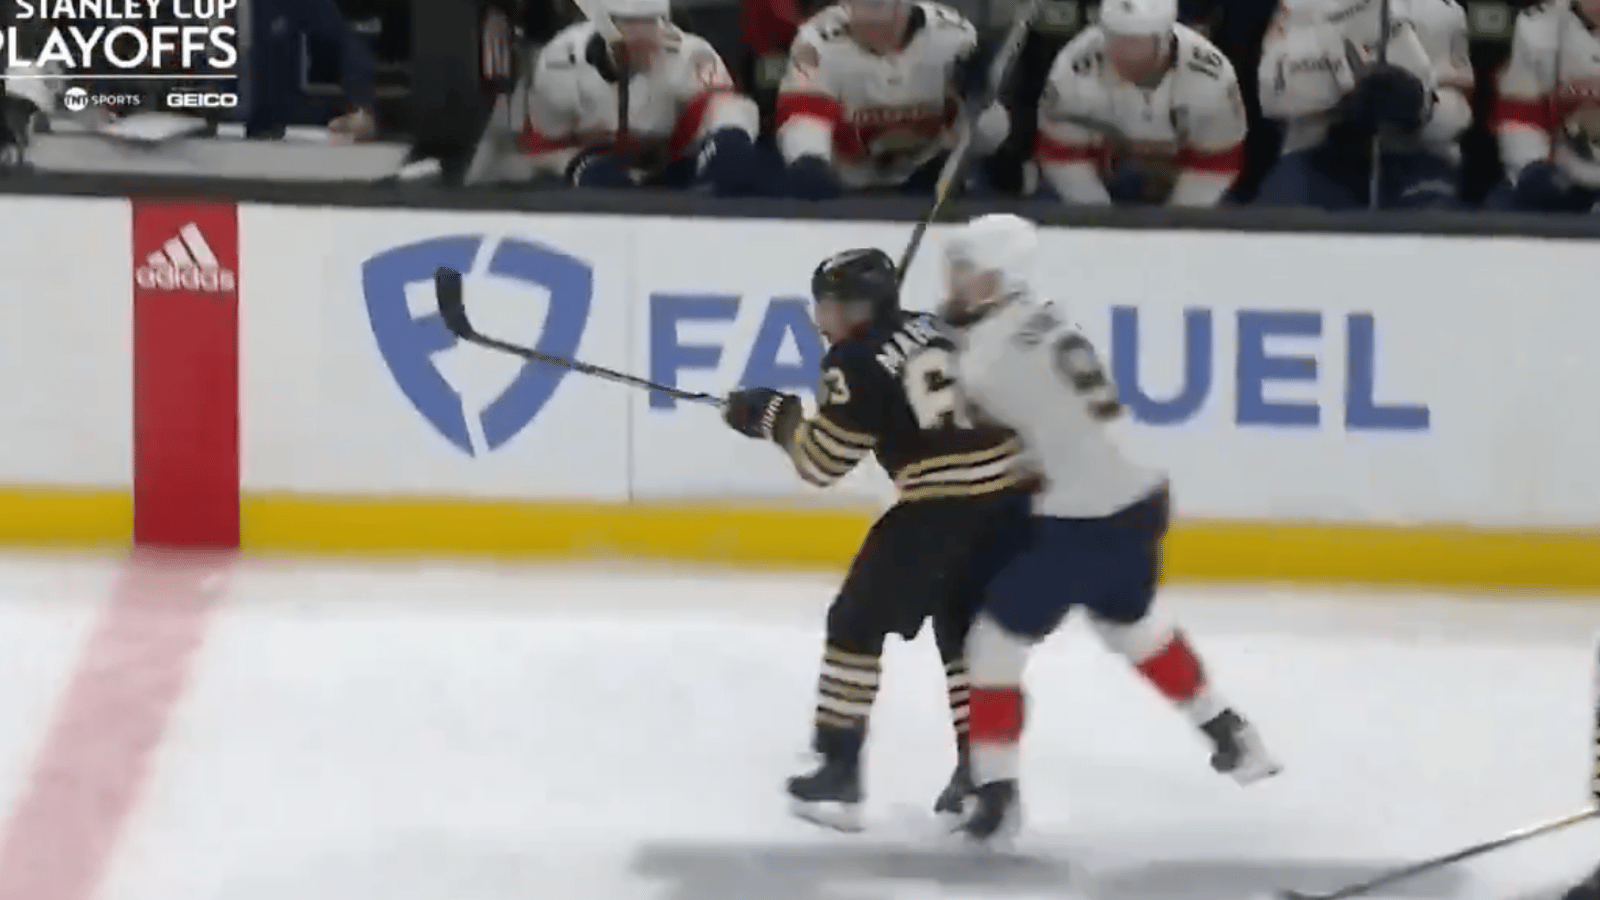 Sam Bennett fires back at his critics after injuring Brad Marchand